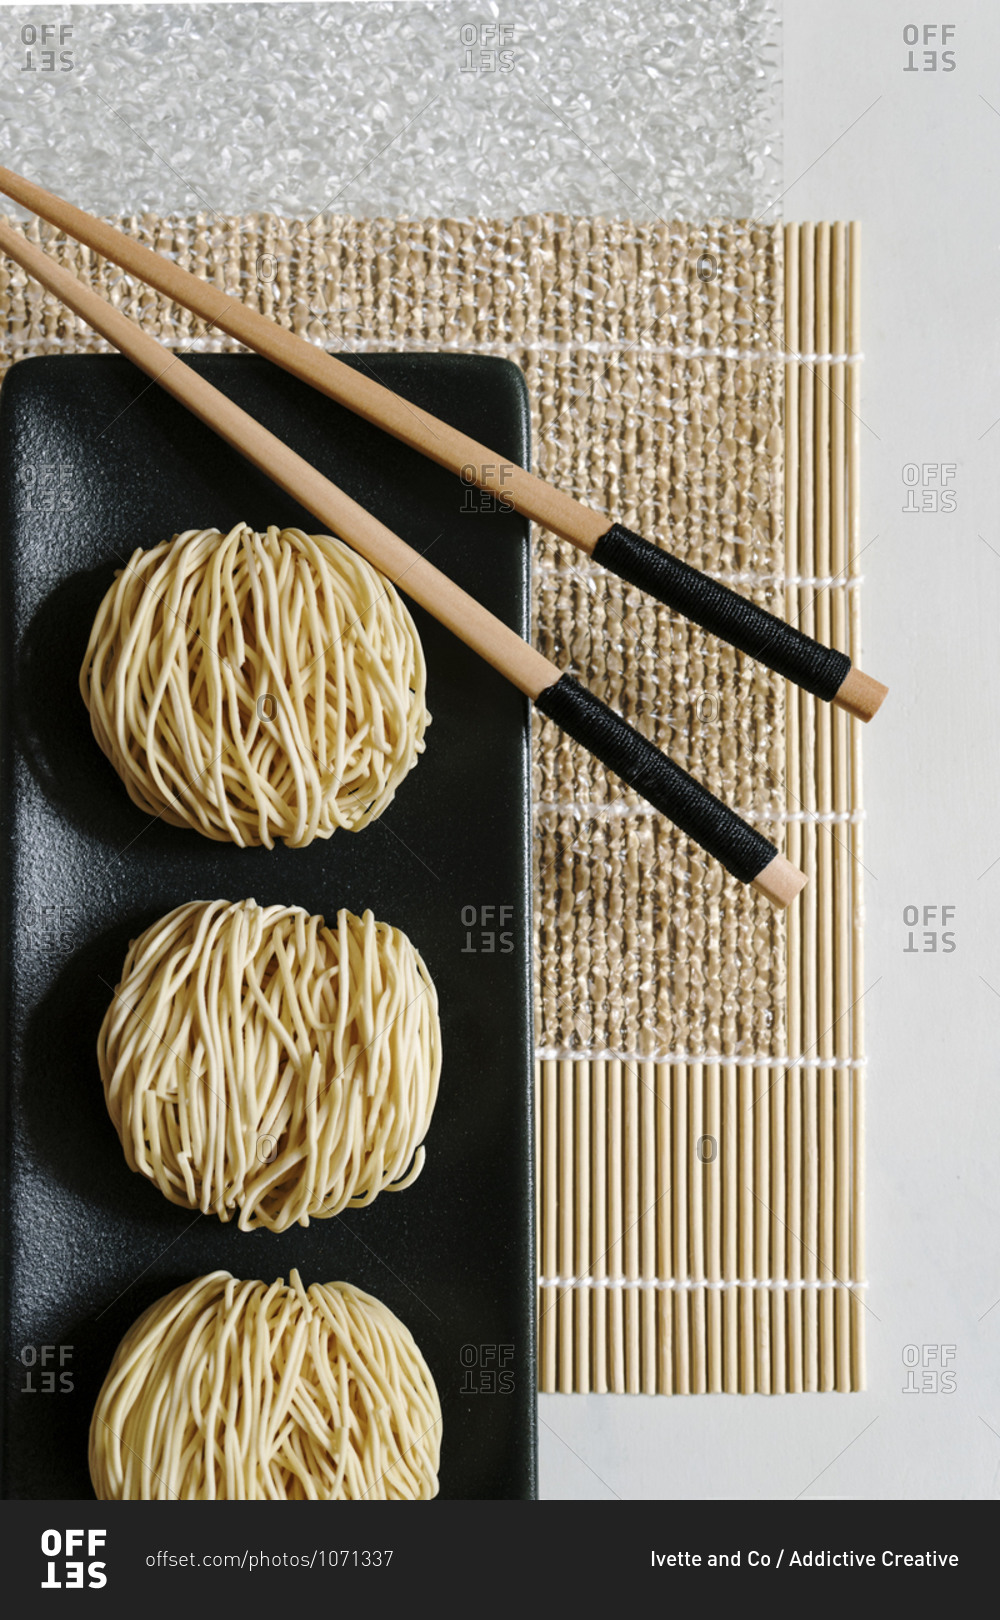 From above of round Asian noodles and wooden chopsticks arranged on bamboo mat on table in cafe